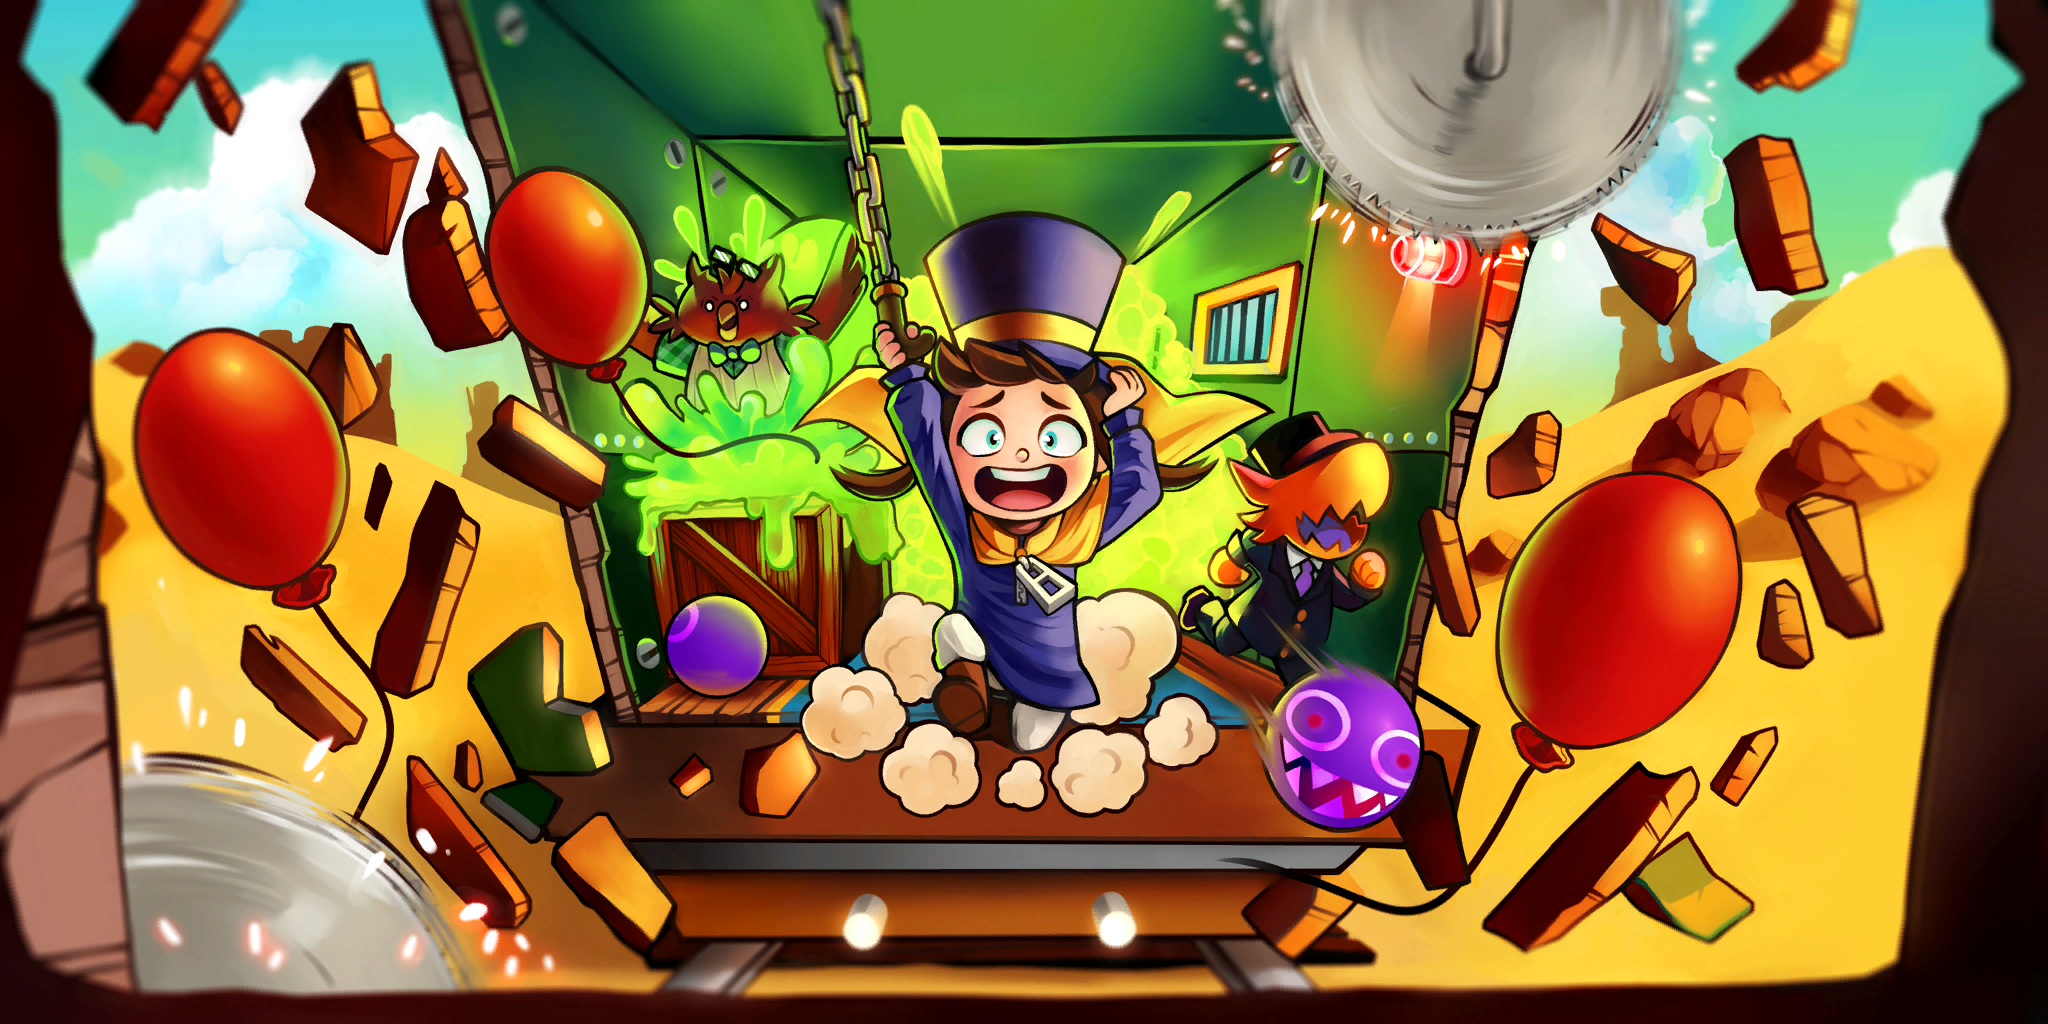 General 2048x1024 video games A Hat In Time open mouth hat